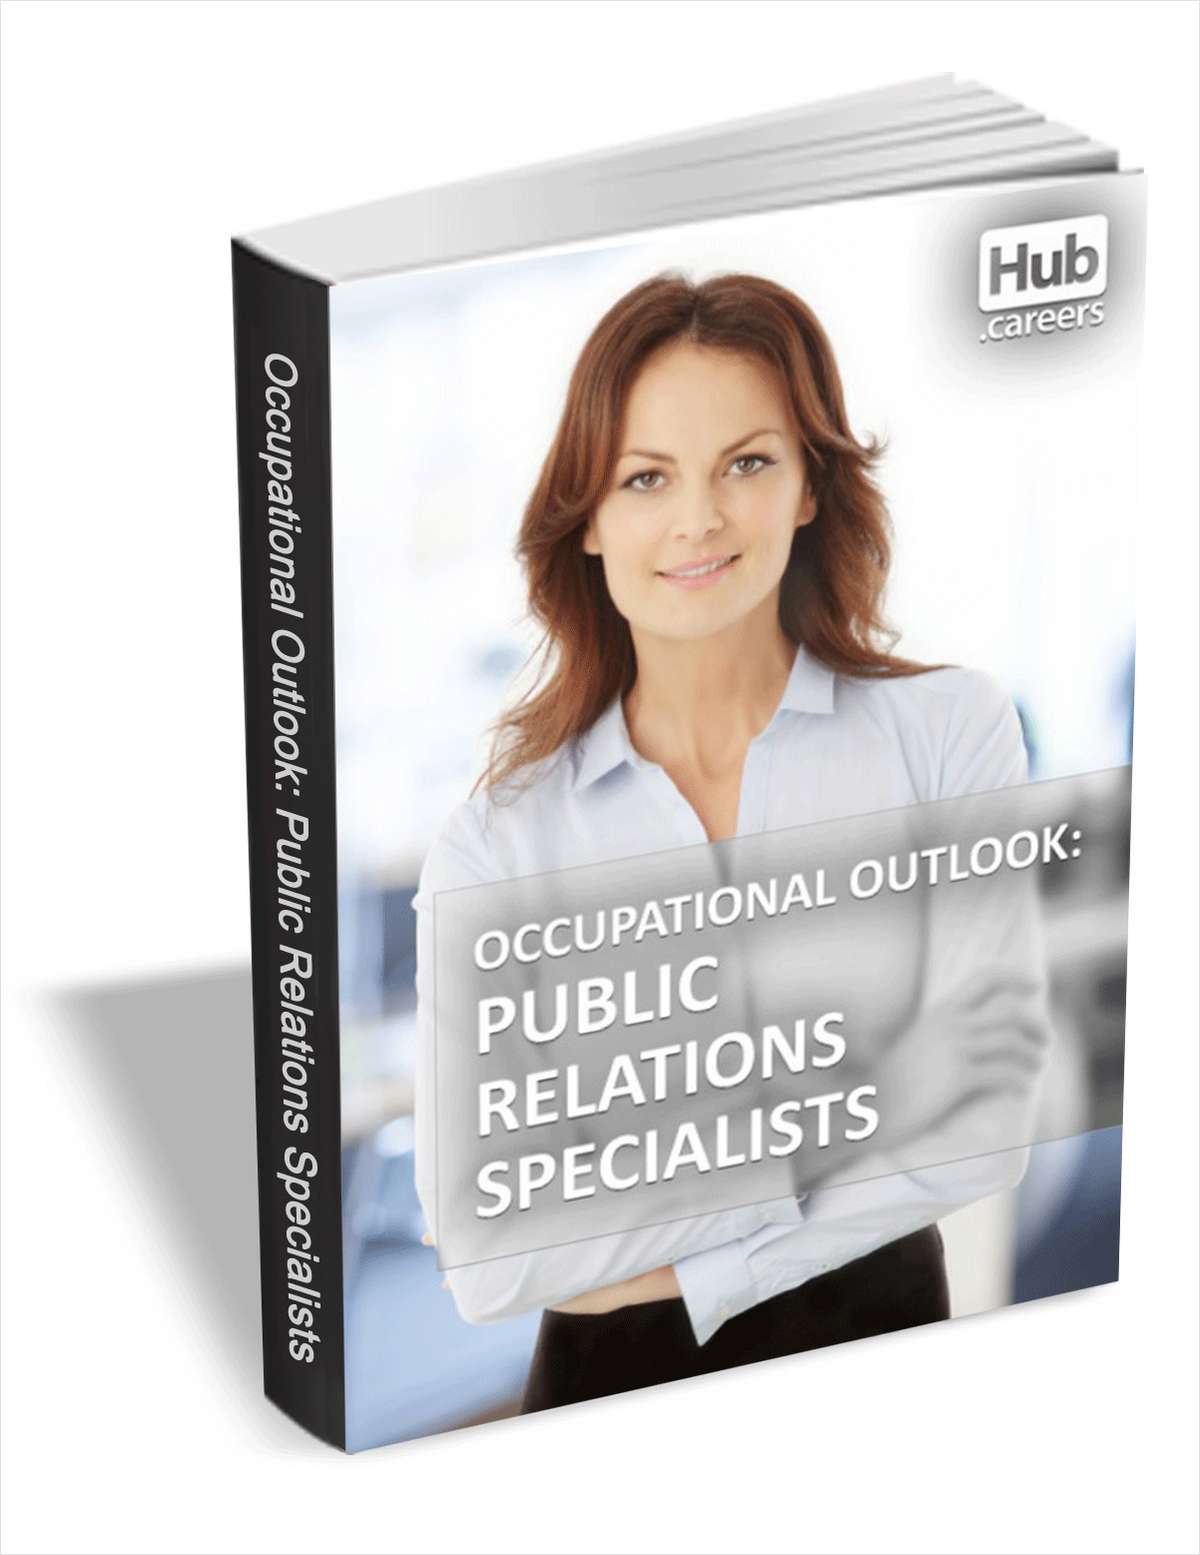 Public Relations Specialists - Occupational Outlook